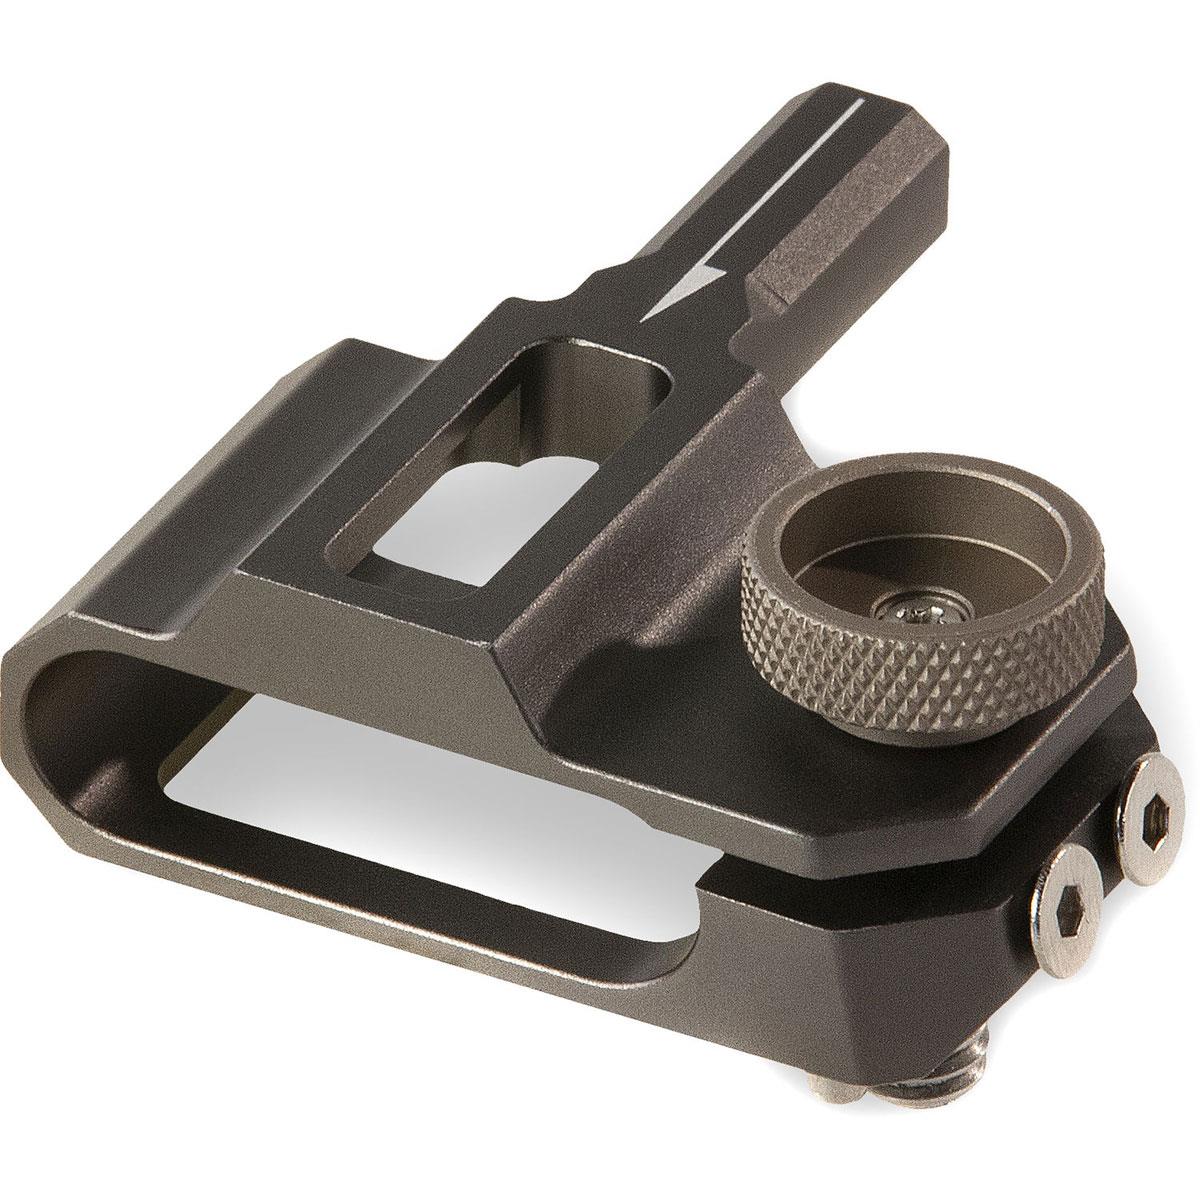 

Tilta SSD Drive Holder for Wise, Tactical Finish